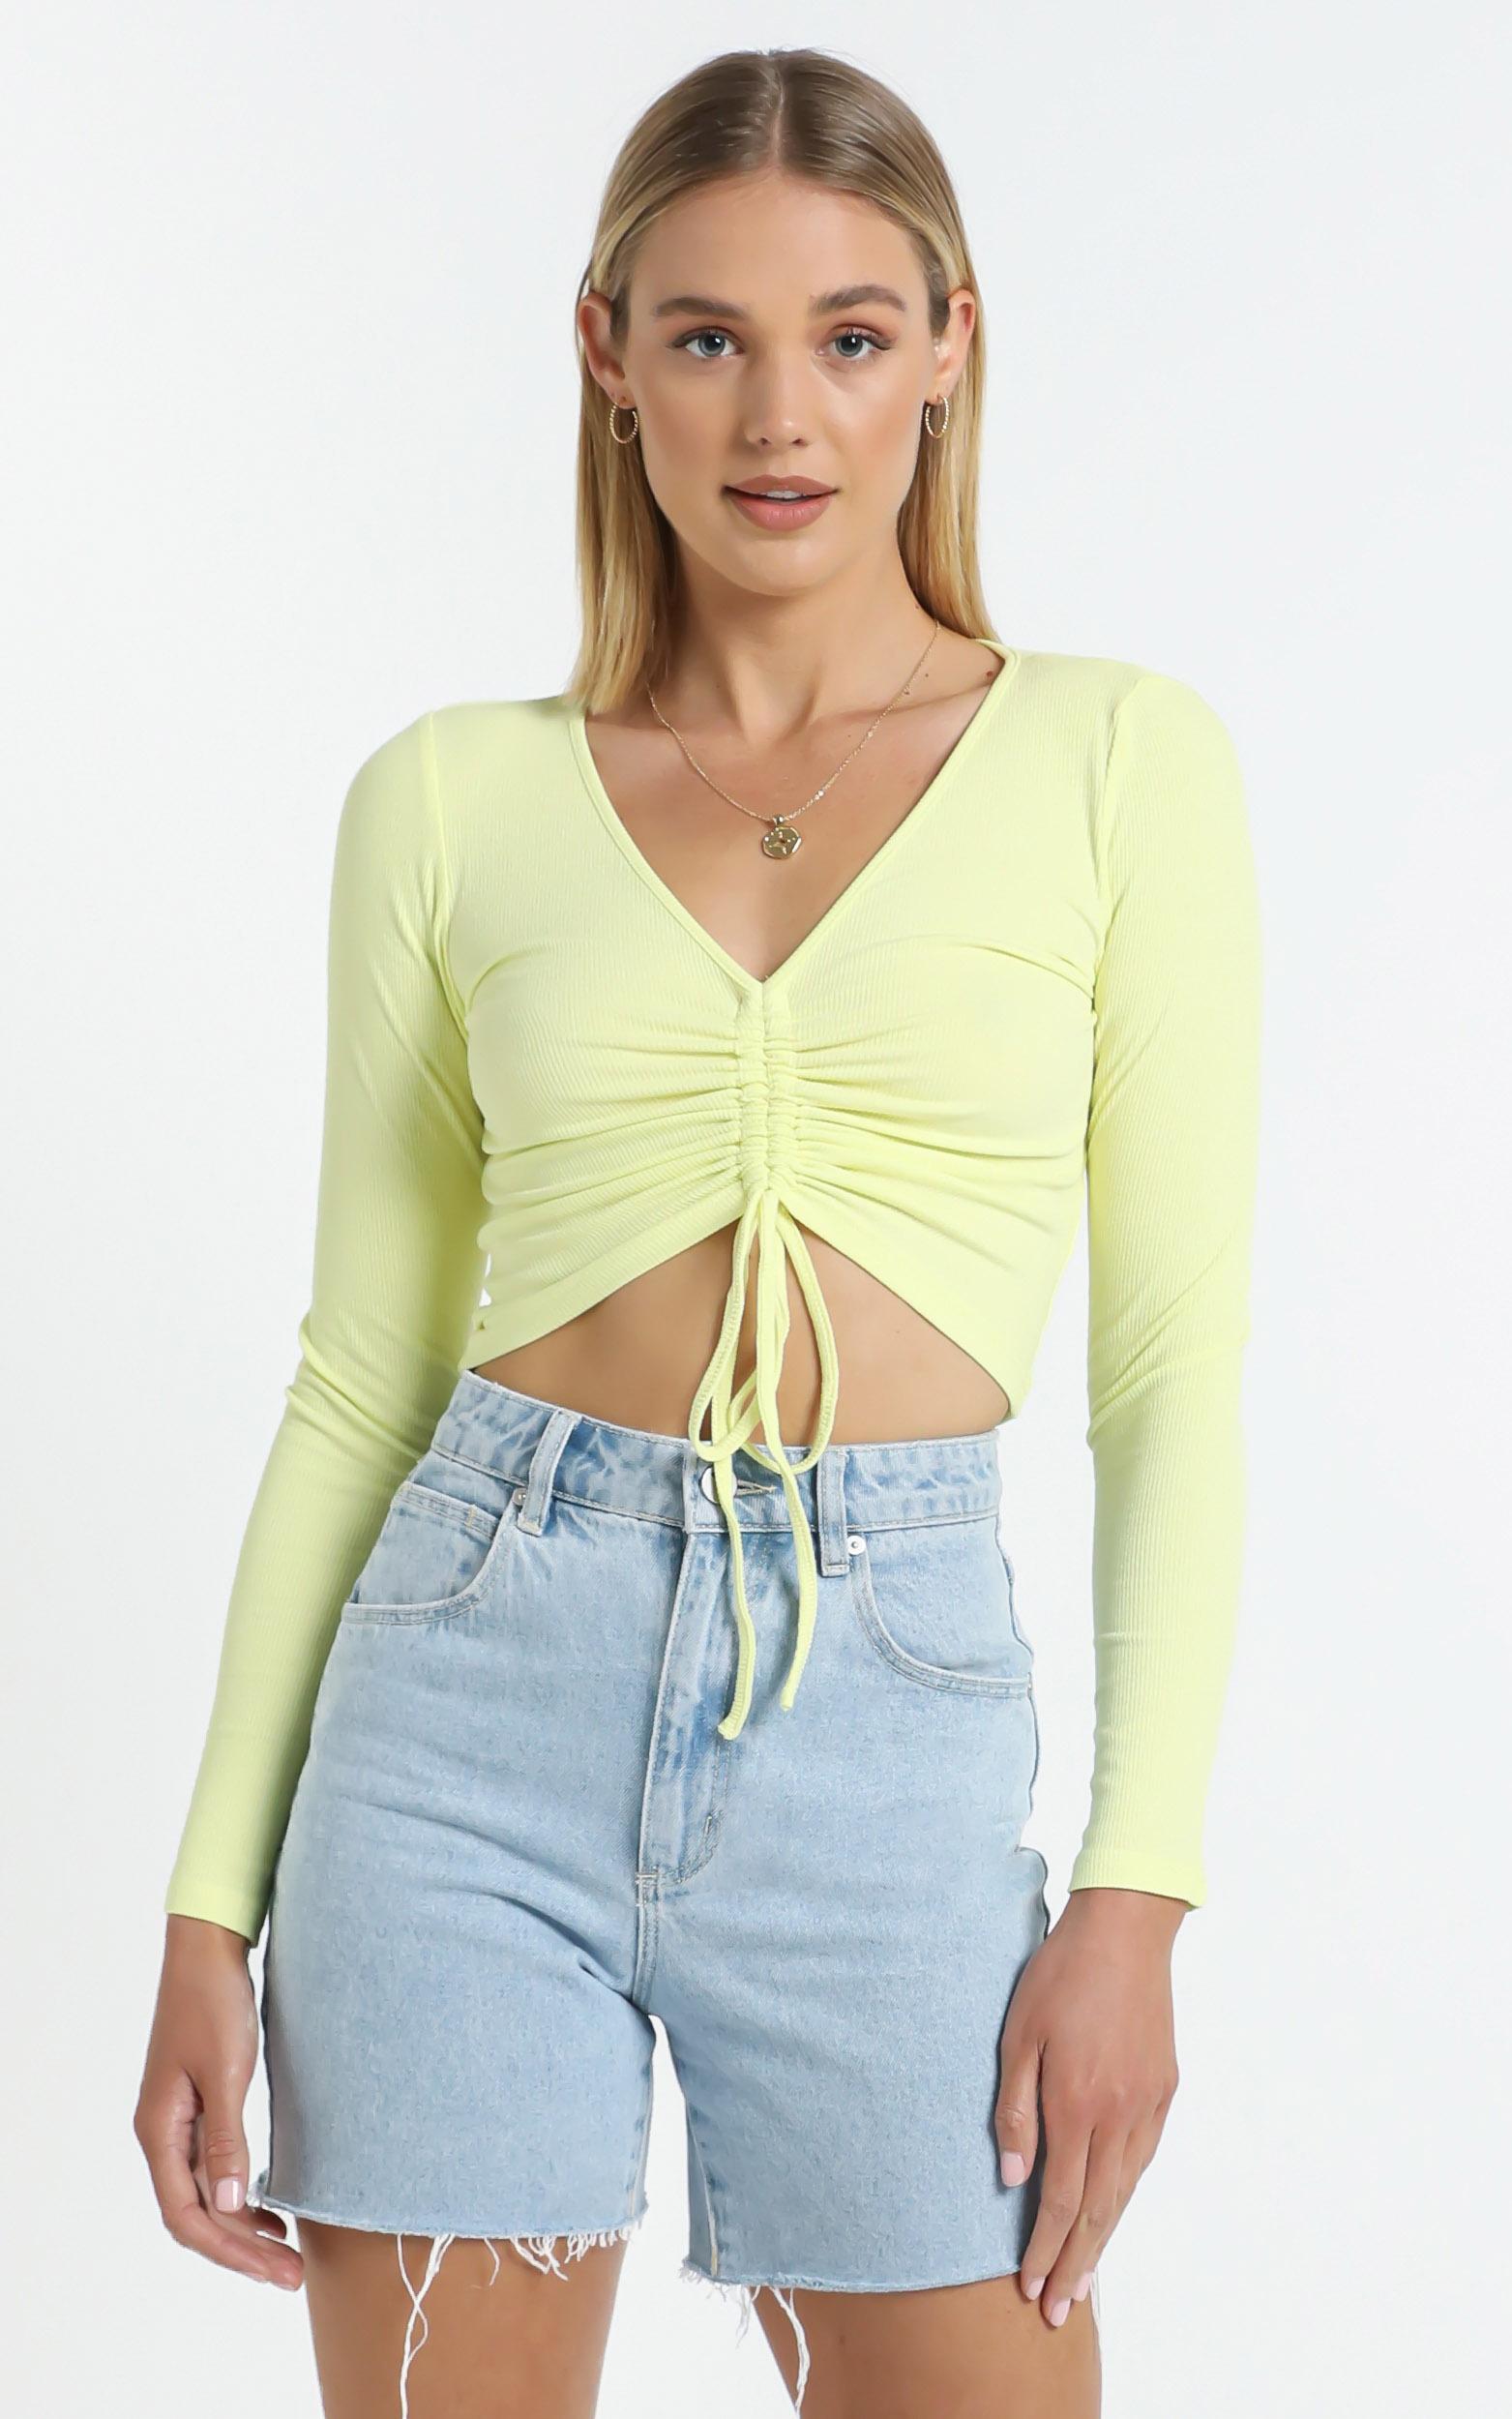 Eleanora Top in Pastel Yellow - 14 (XL), Yellow, hi-res image number null